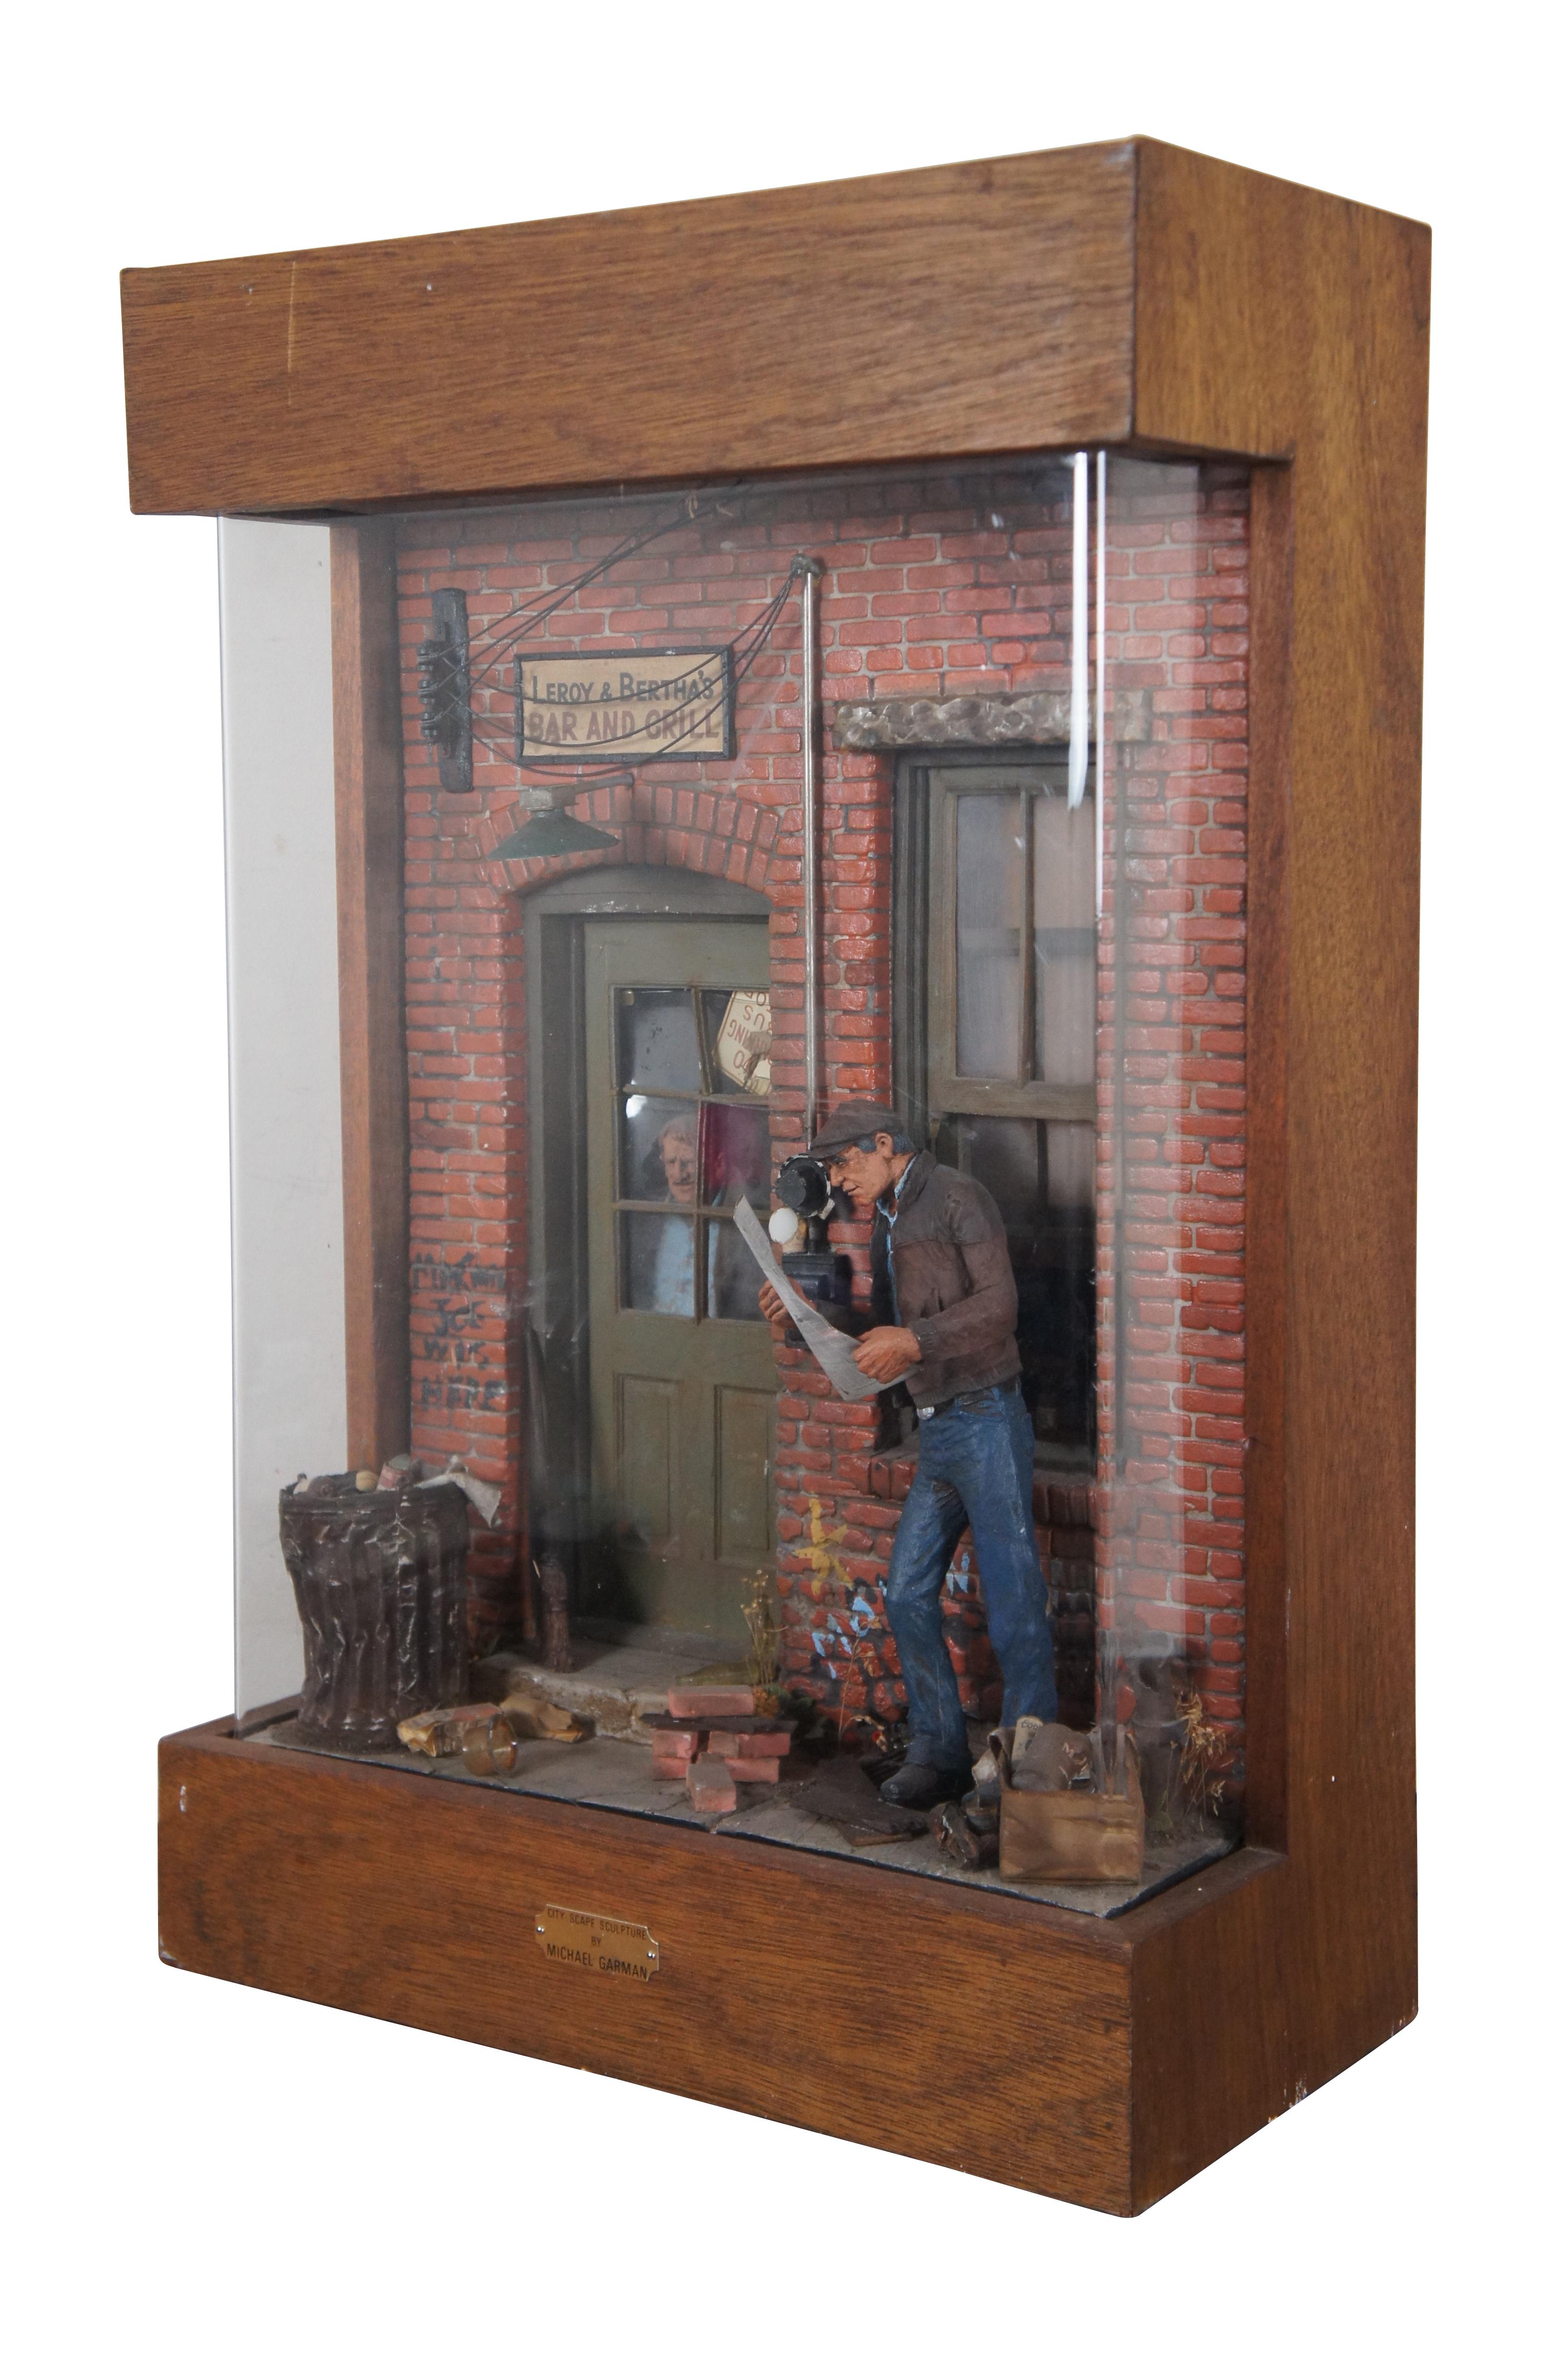 Vintage 1970’s diorama / shadowbox sculpture titled Yesterday’s News by Michael Garmin. This tableau is a recreation of a part of Garmin’s extensive Magic Town and shows a man leaning against and alley wall reading a newspaper. A sign above the